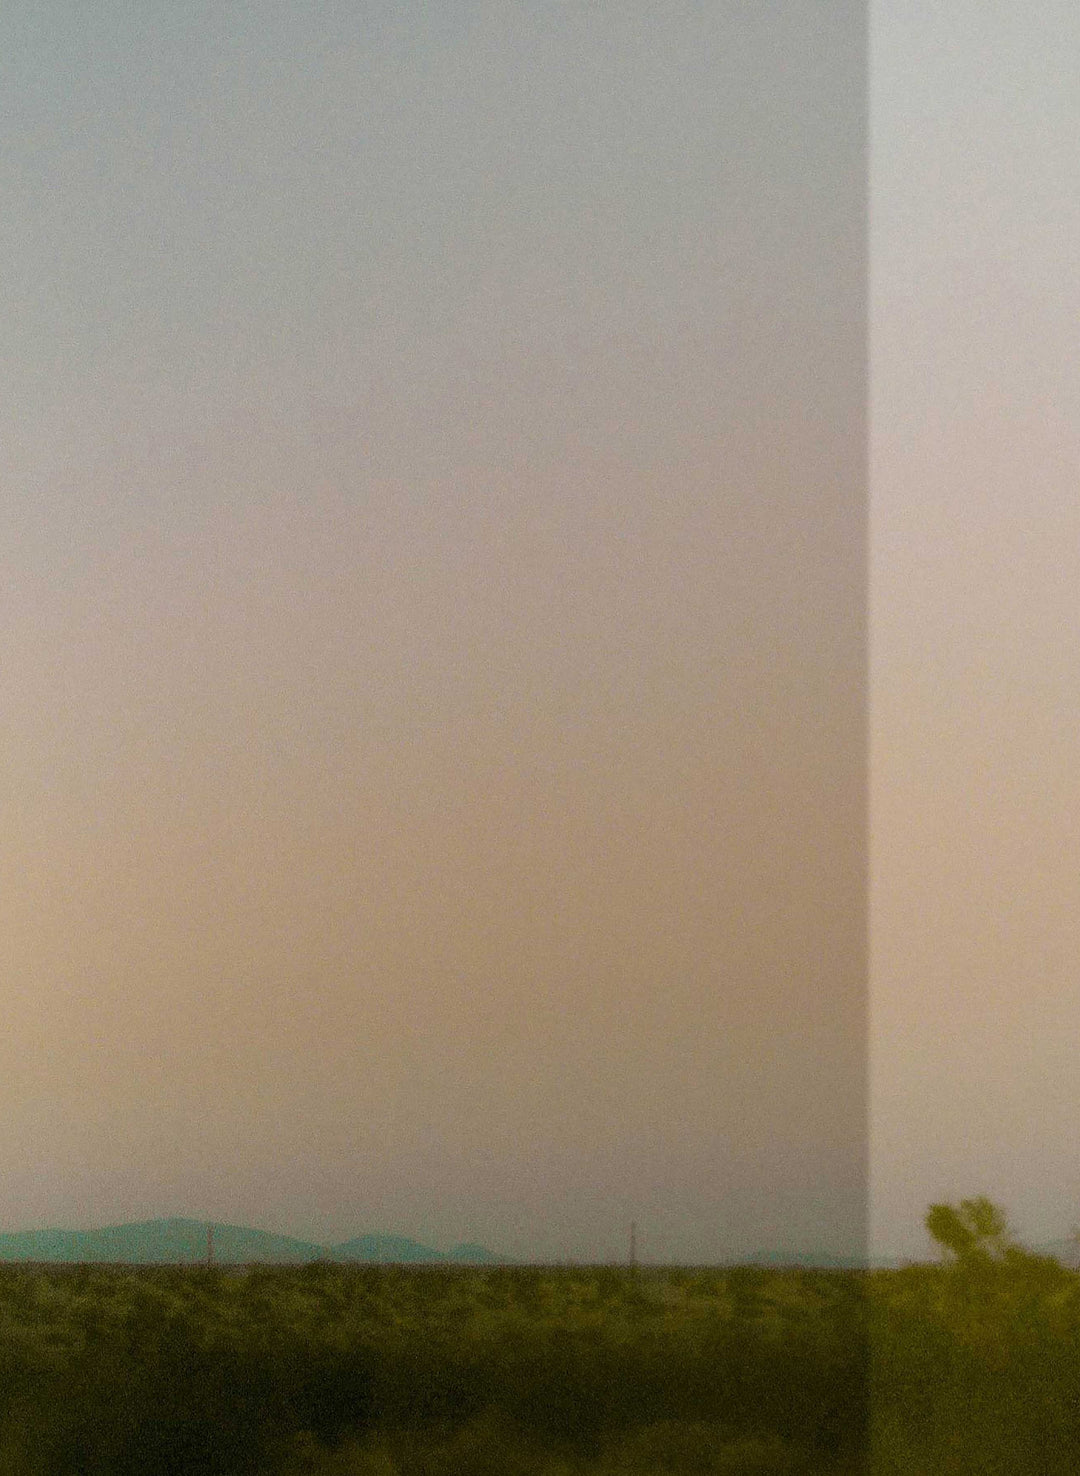 a comparison of the same color of the sky